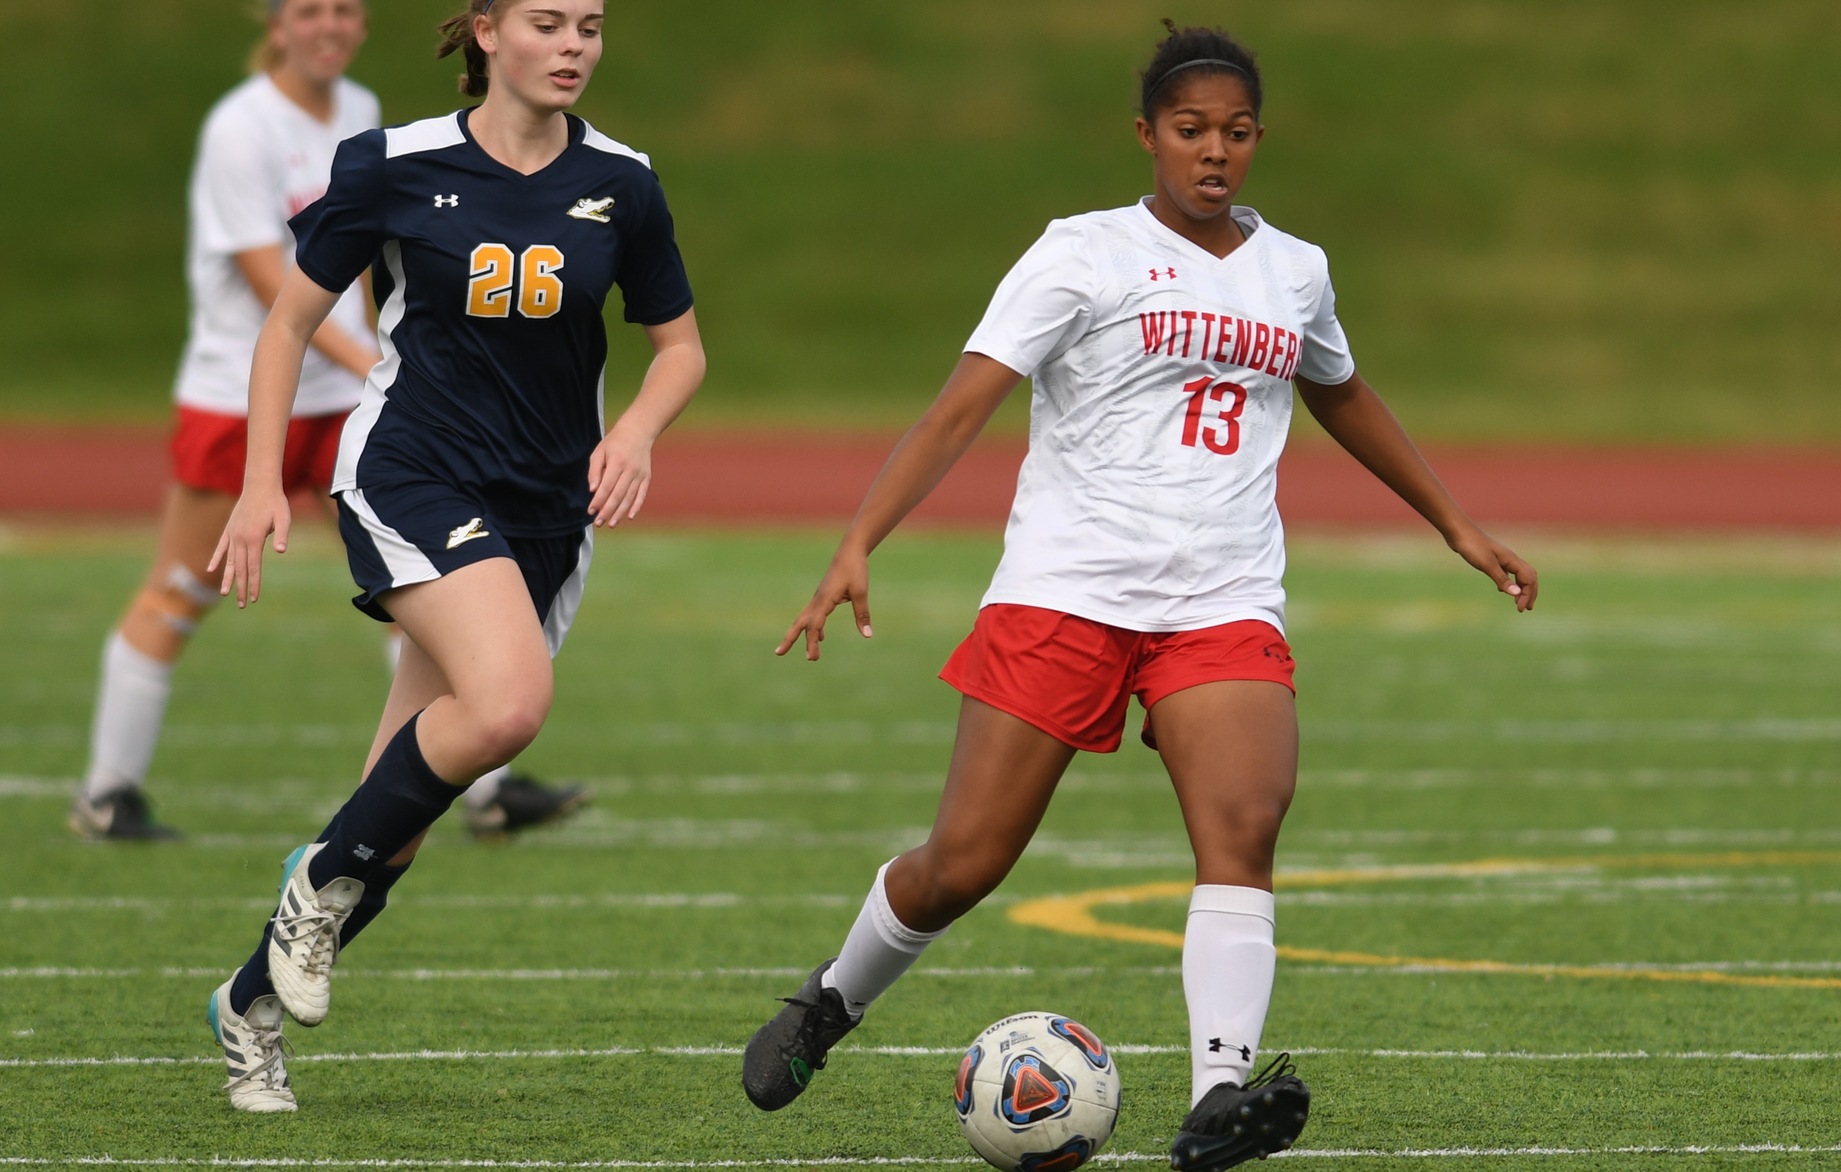 Sophomore Jasmine Evans recorded her first assist of the season in the Tigers' 3-1 home loss against Hanover